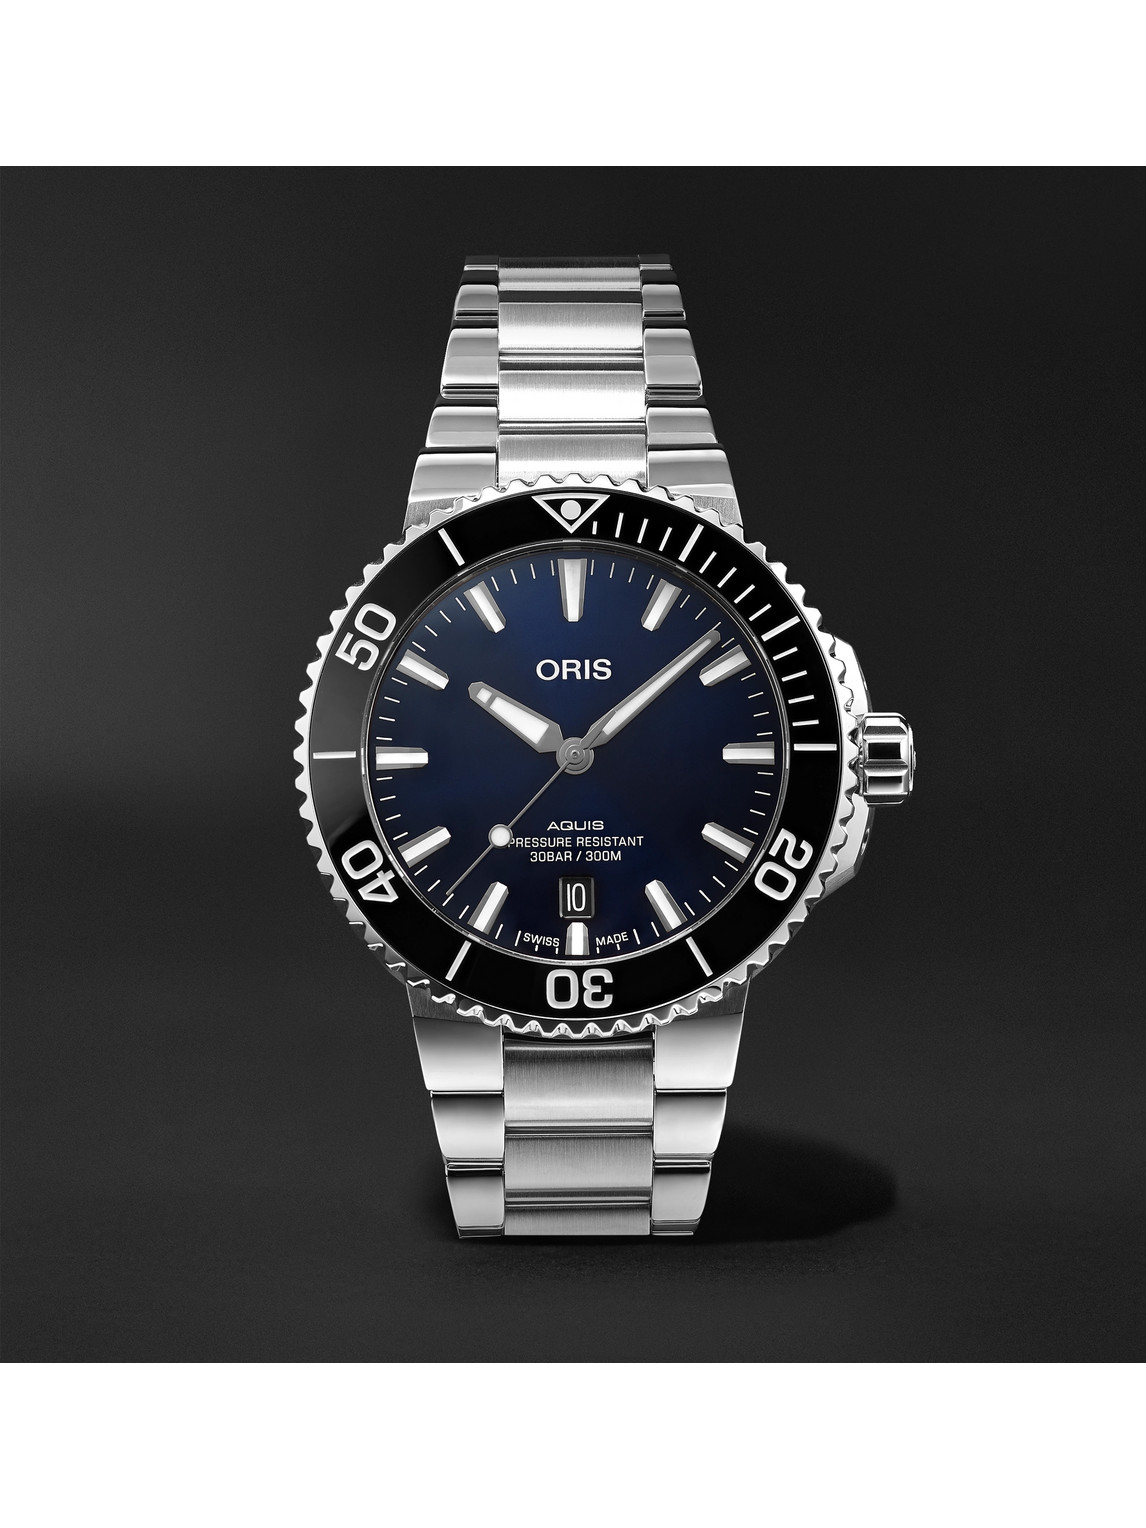 Oris Aquis Date Automatic 41.5mm Stainless Steel Watch, Ref. No. 01 733 7766 4135-07 8 22 05peb In Blue